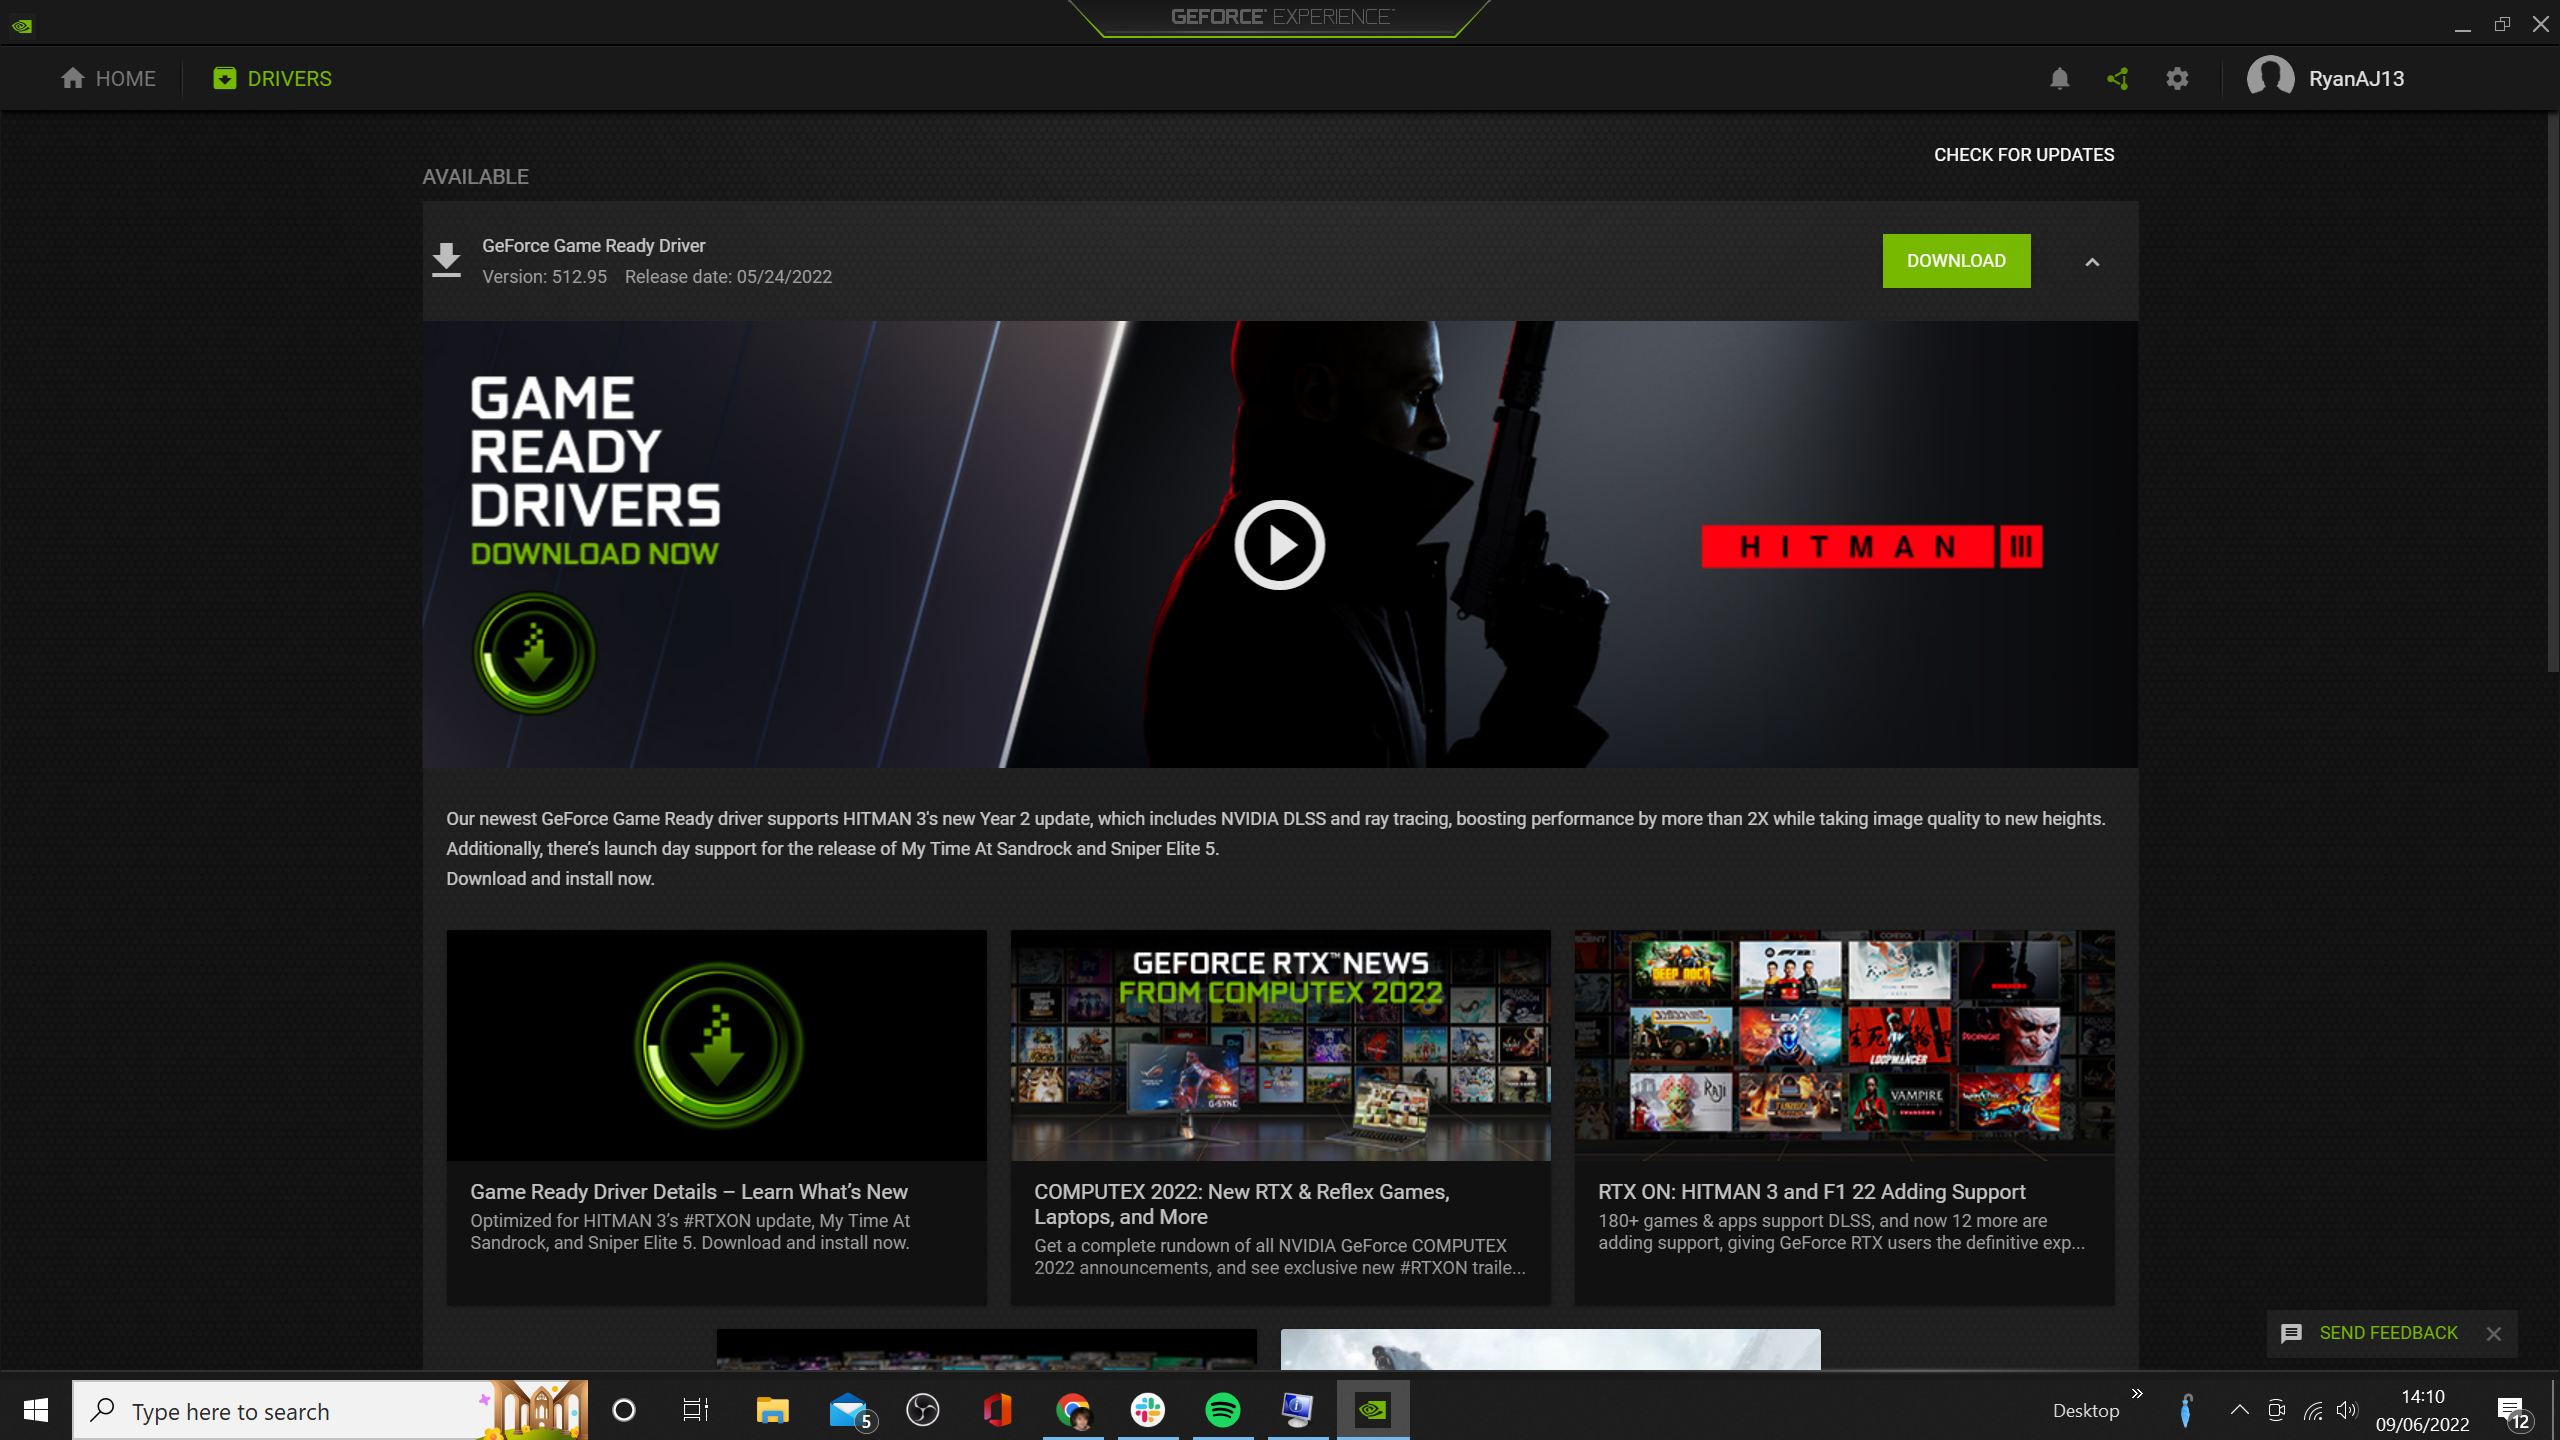 Go to your graphics card manufacturer's website
Download and install the latest drivers for your graphics card